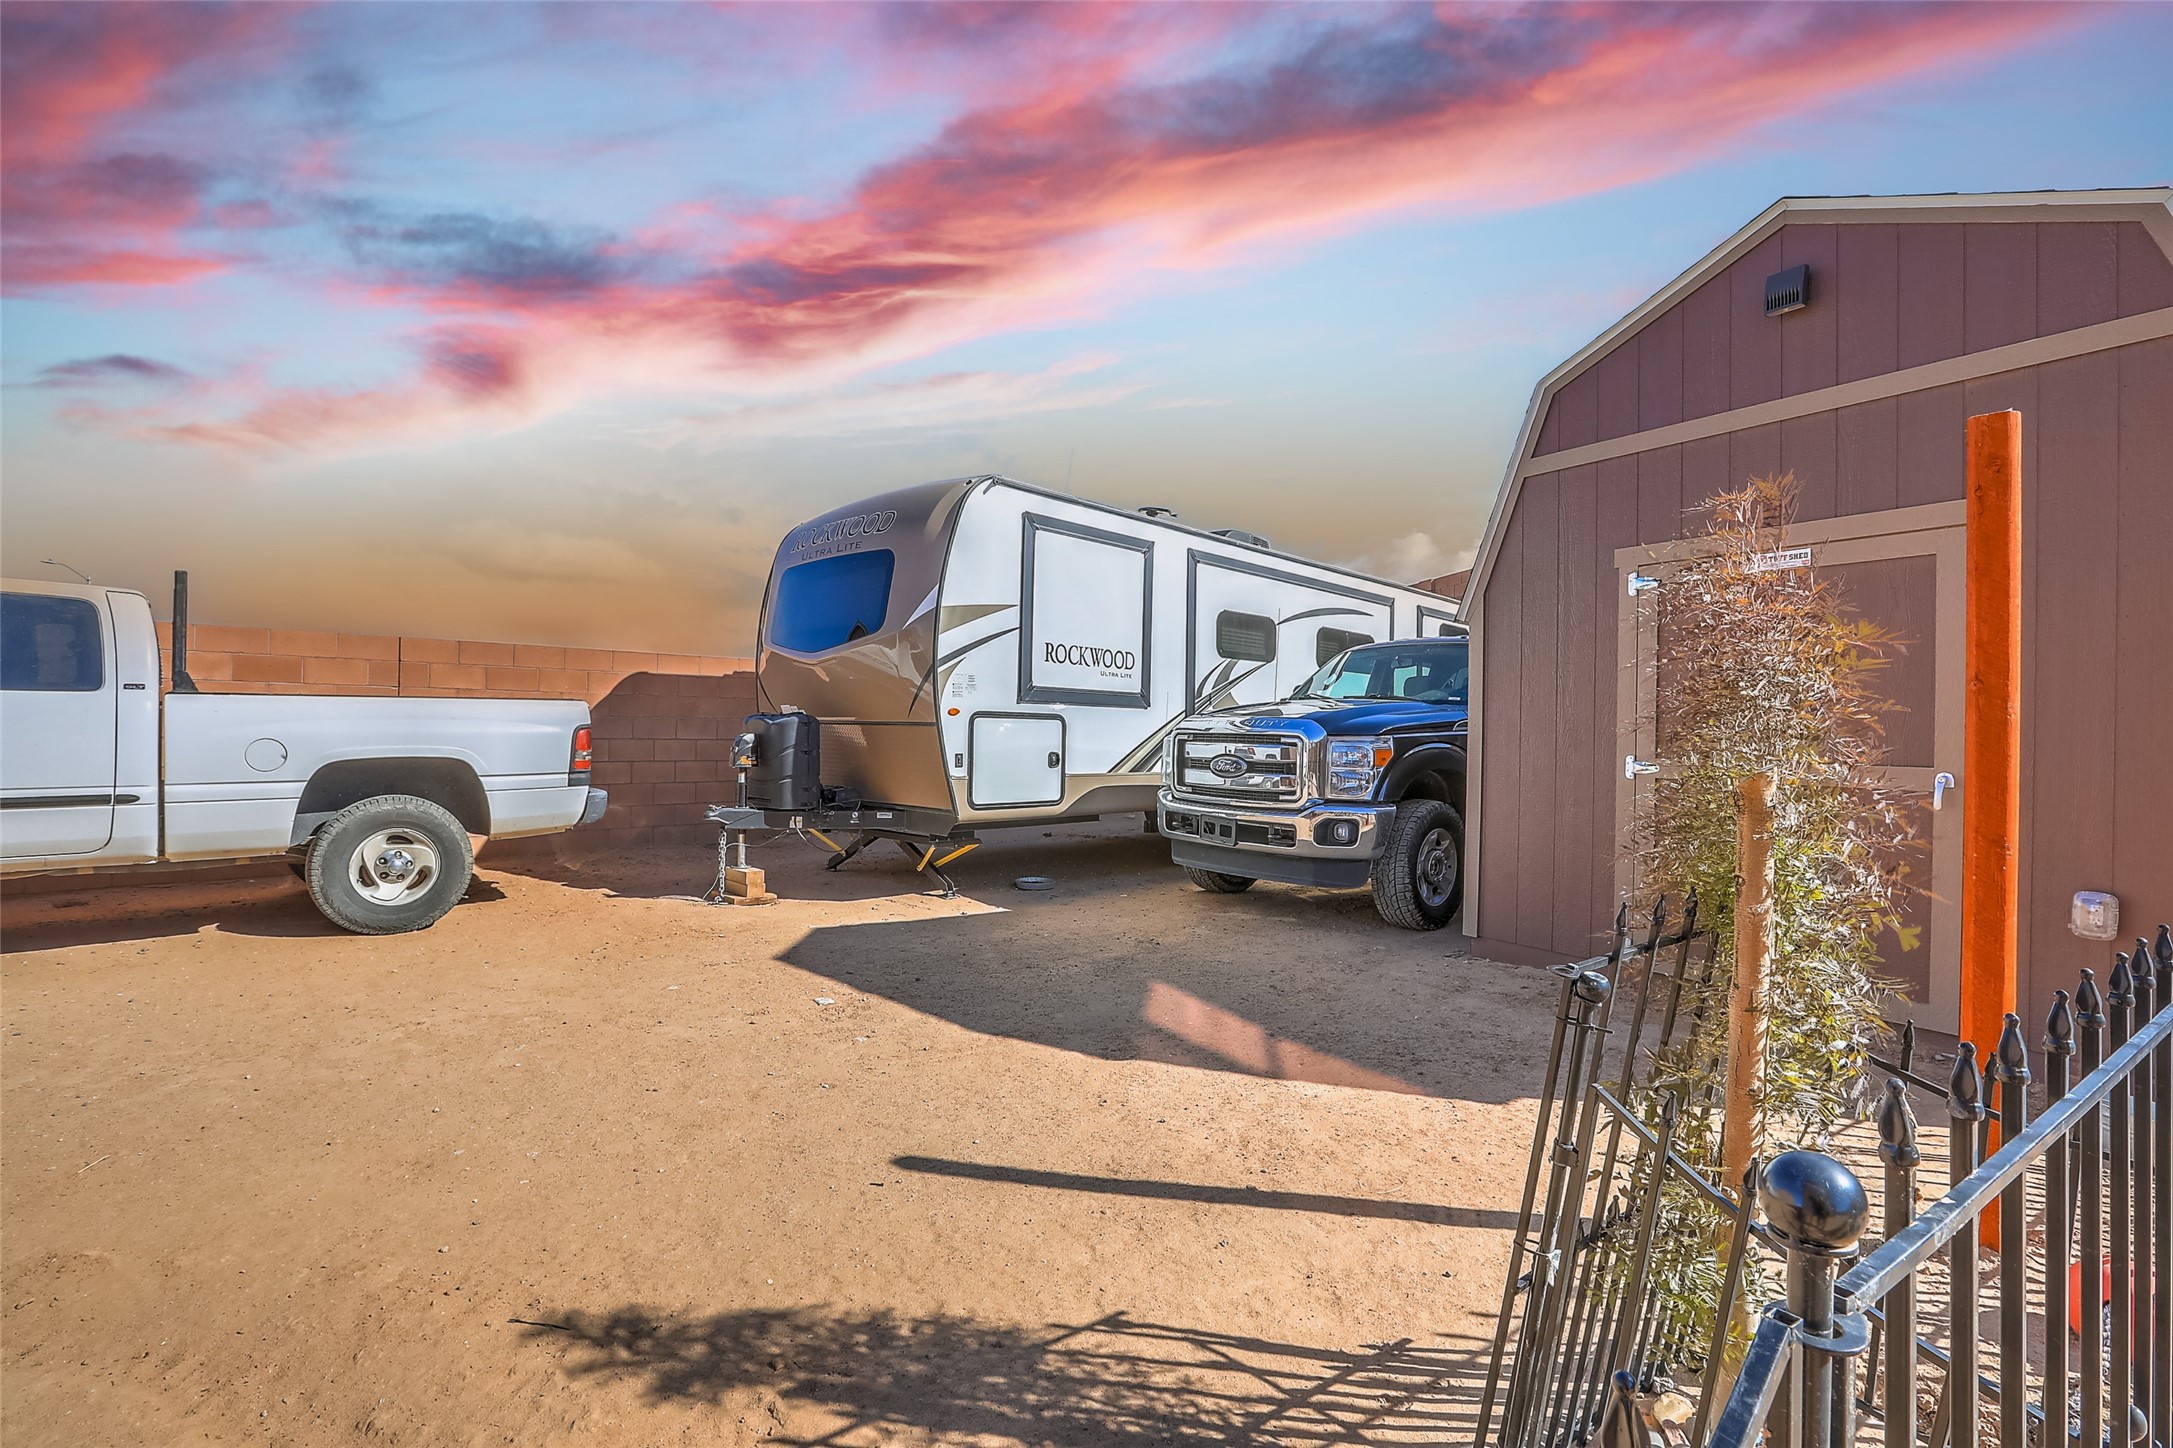 RV parking in back of home
